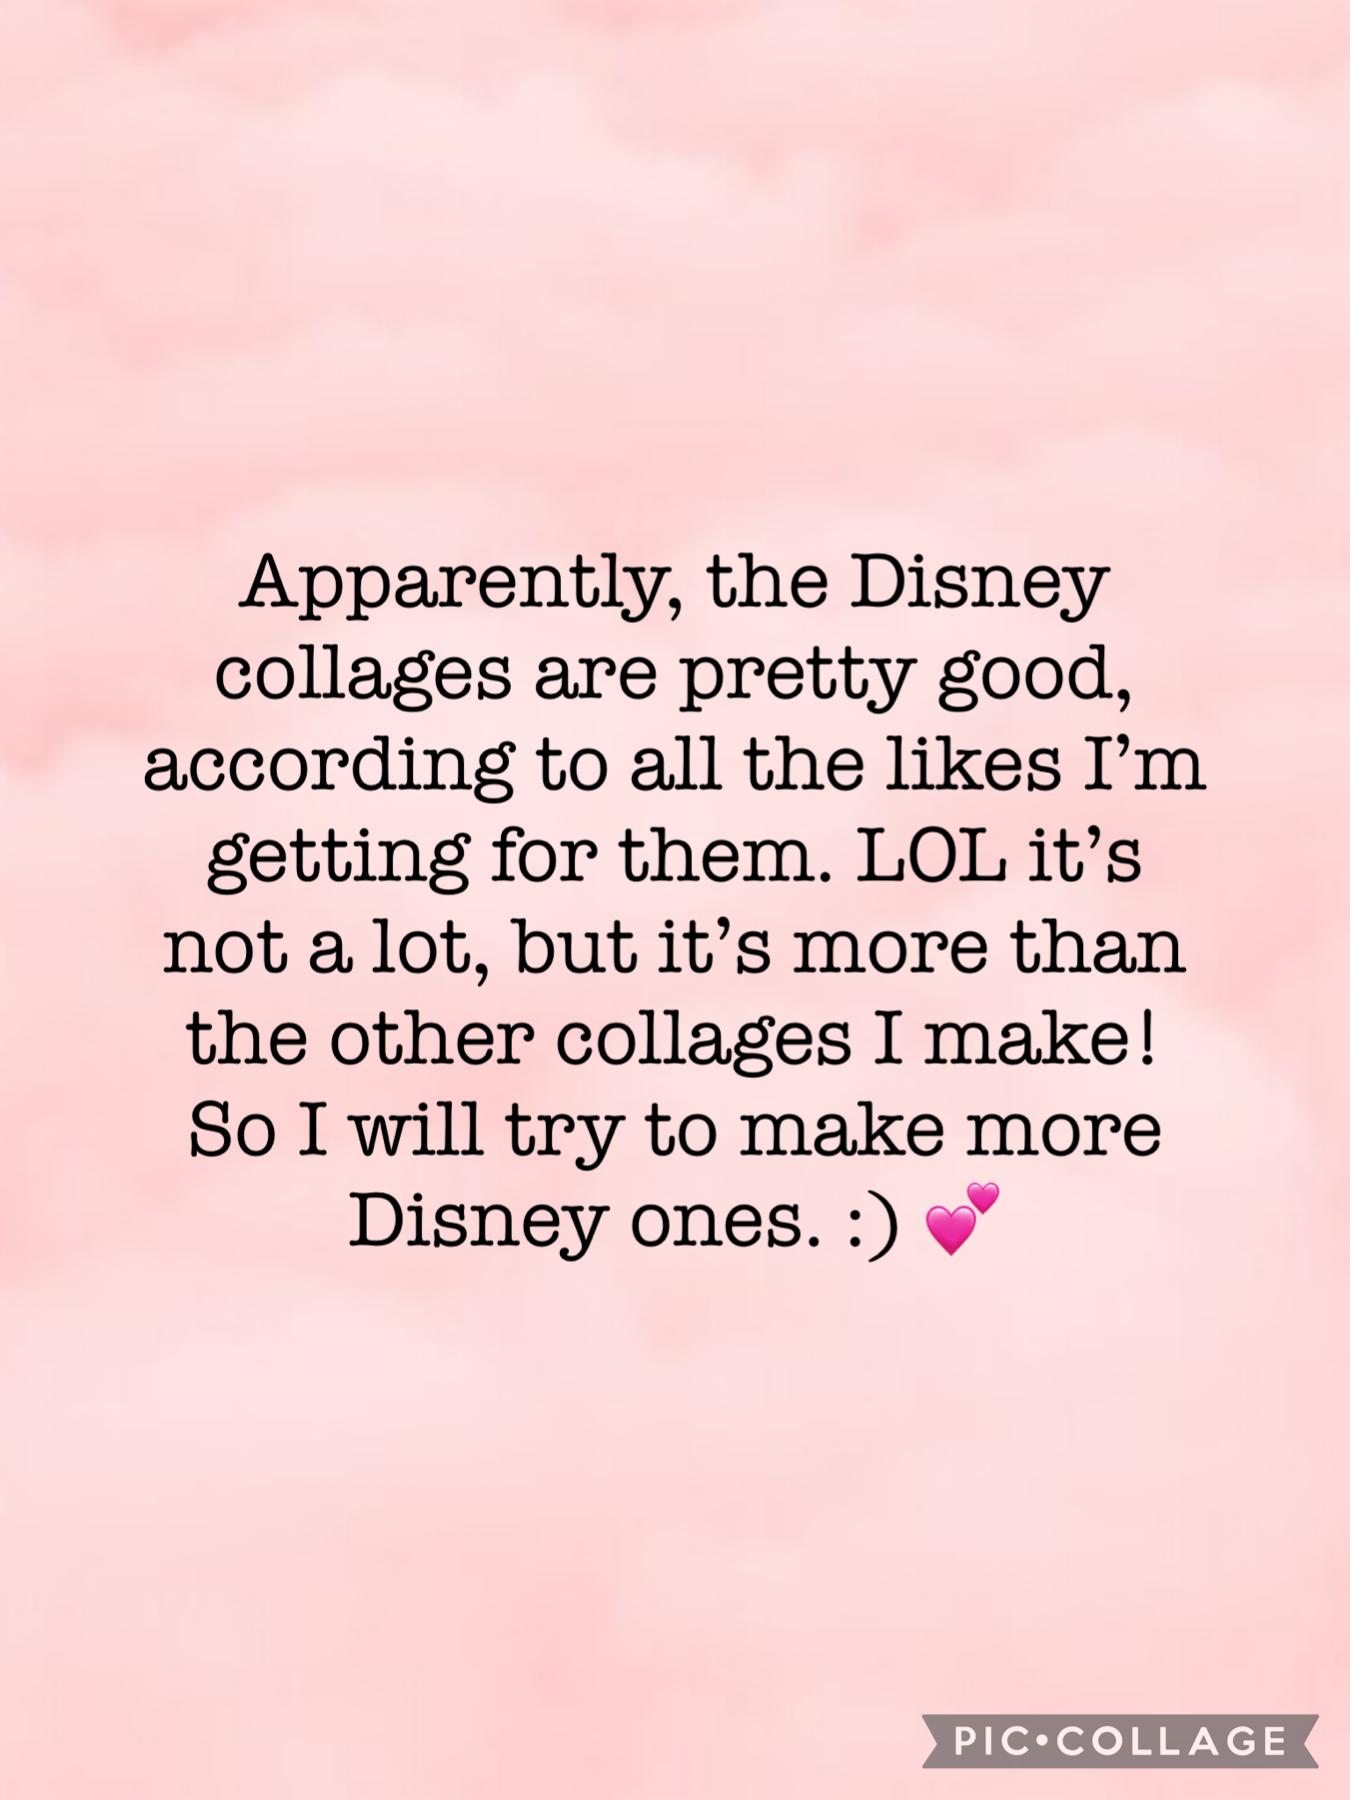 Disney!!! Coming right up!